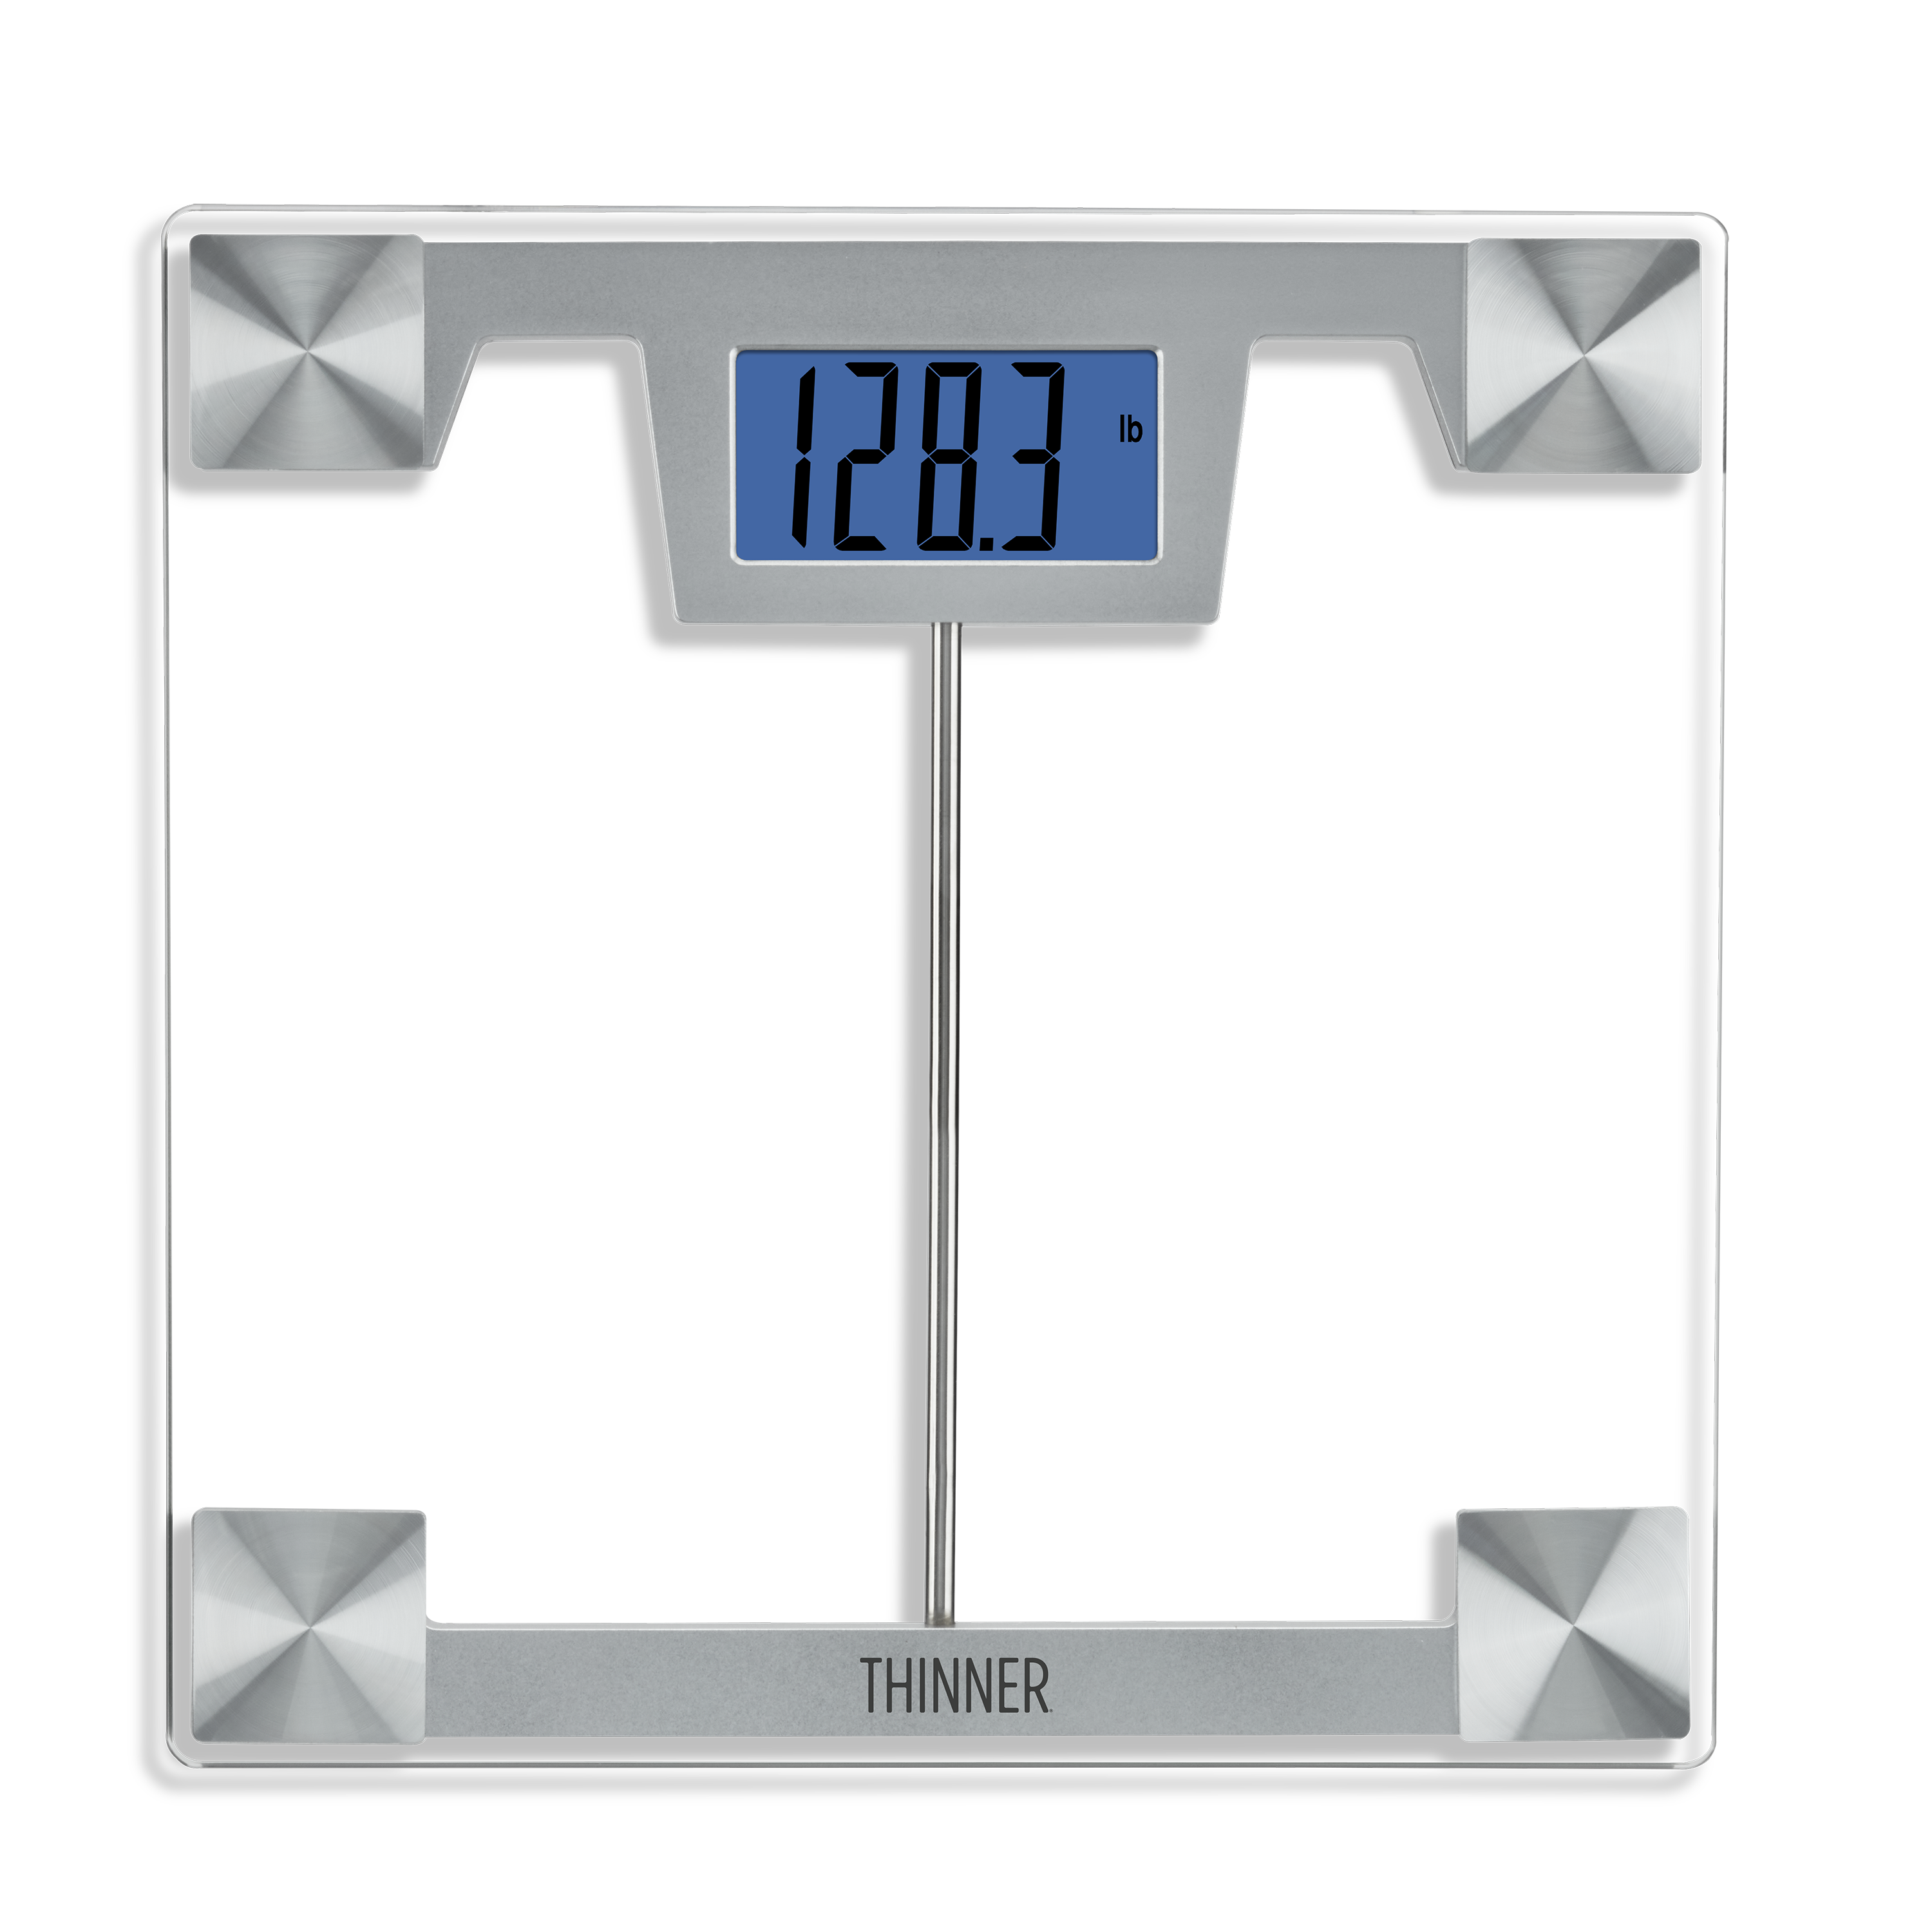 Digital Glass Weight Scale image number 0